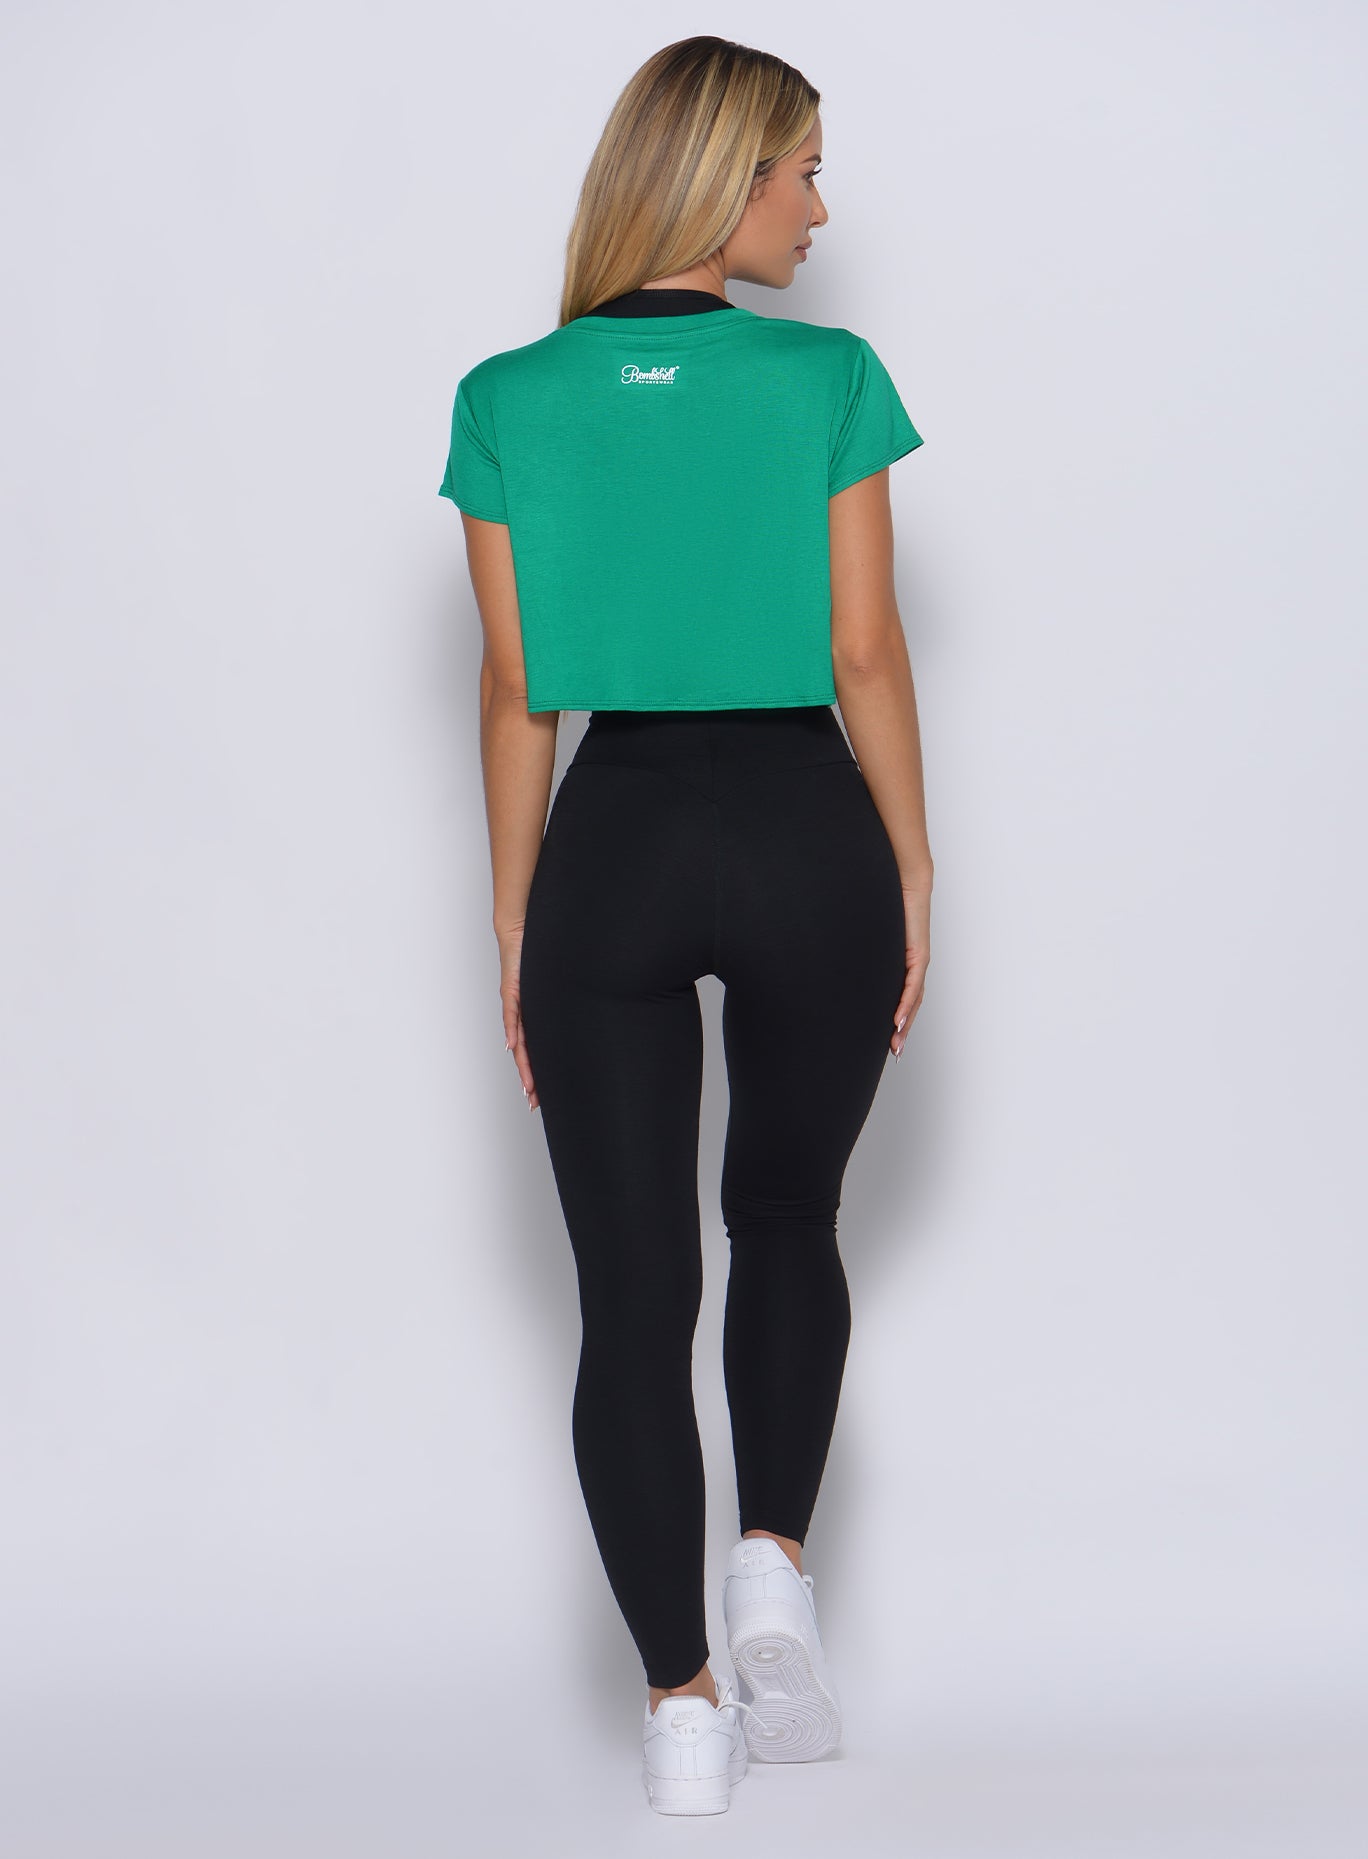 Back profile view of the model facing to her right wearing our freedom tee in apple green color and a black leggings